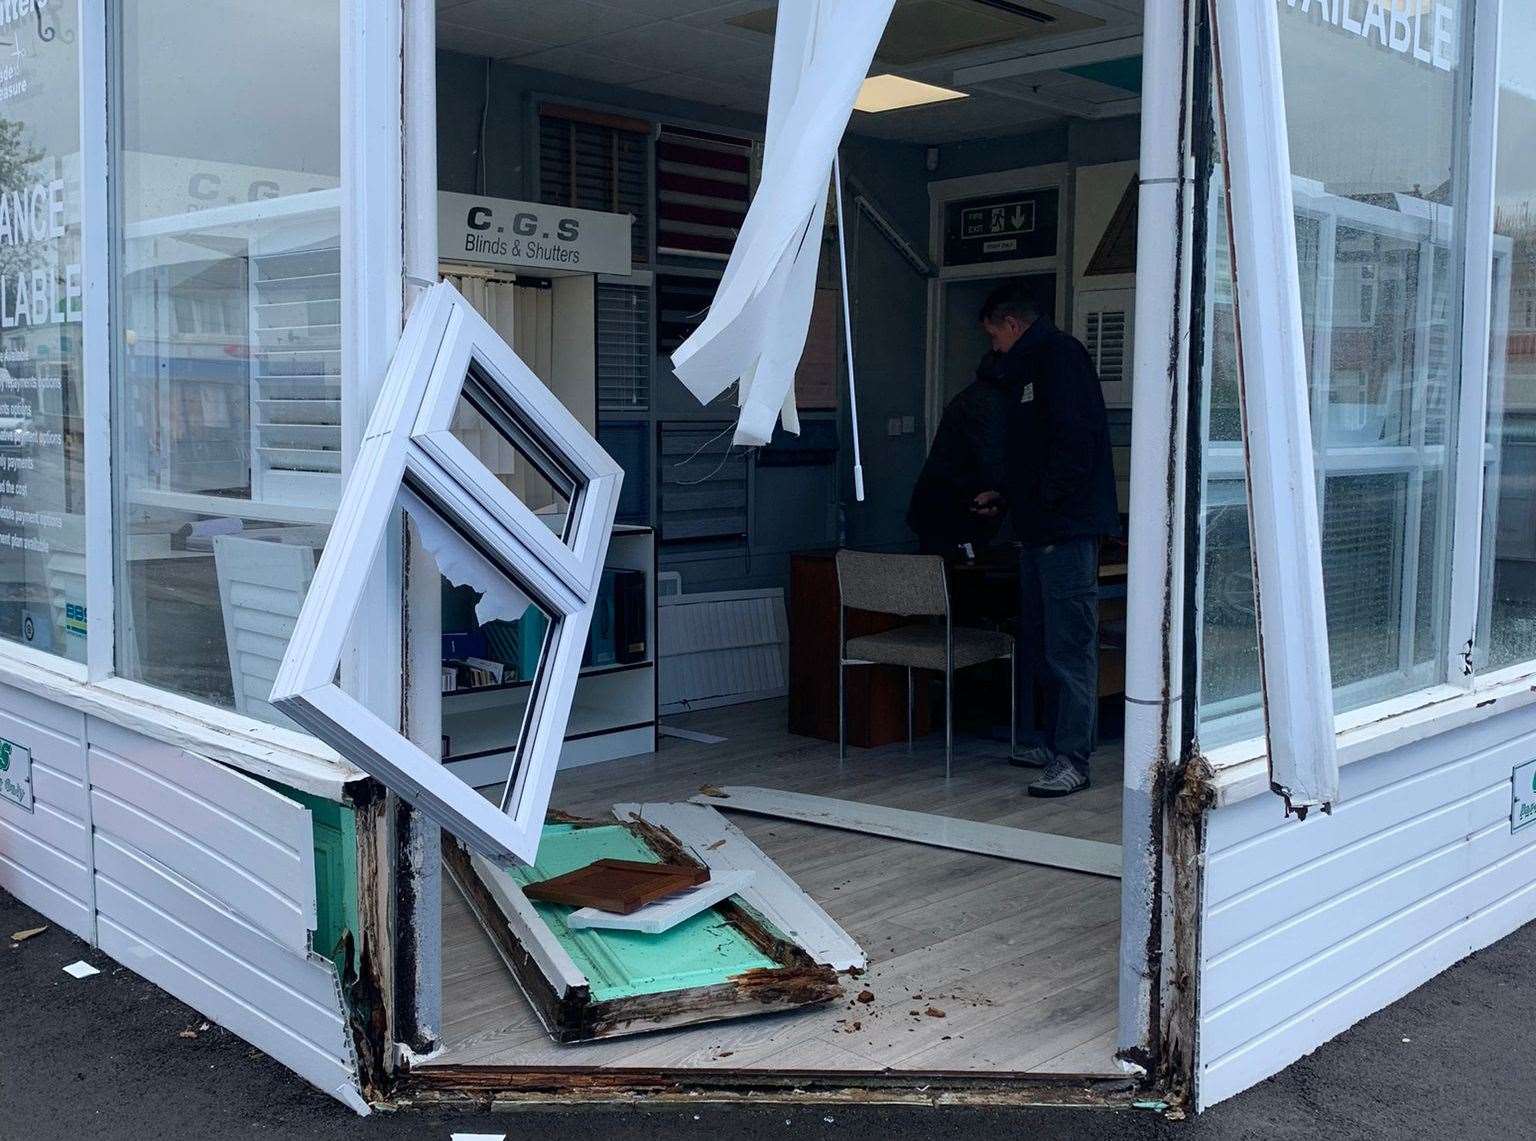 Heavy winds blew out on window and frame from the shop front of CGS Blinds and Shutters in Tankerton, near Whitstable, scattering debris into the street